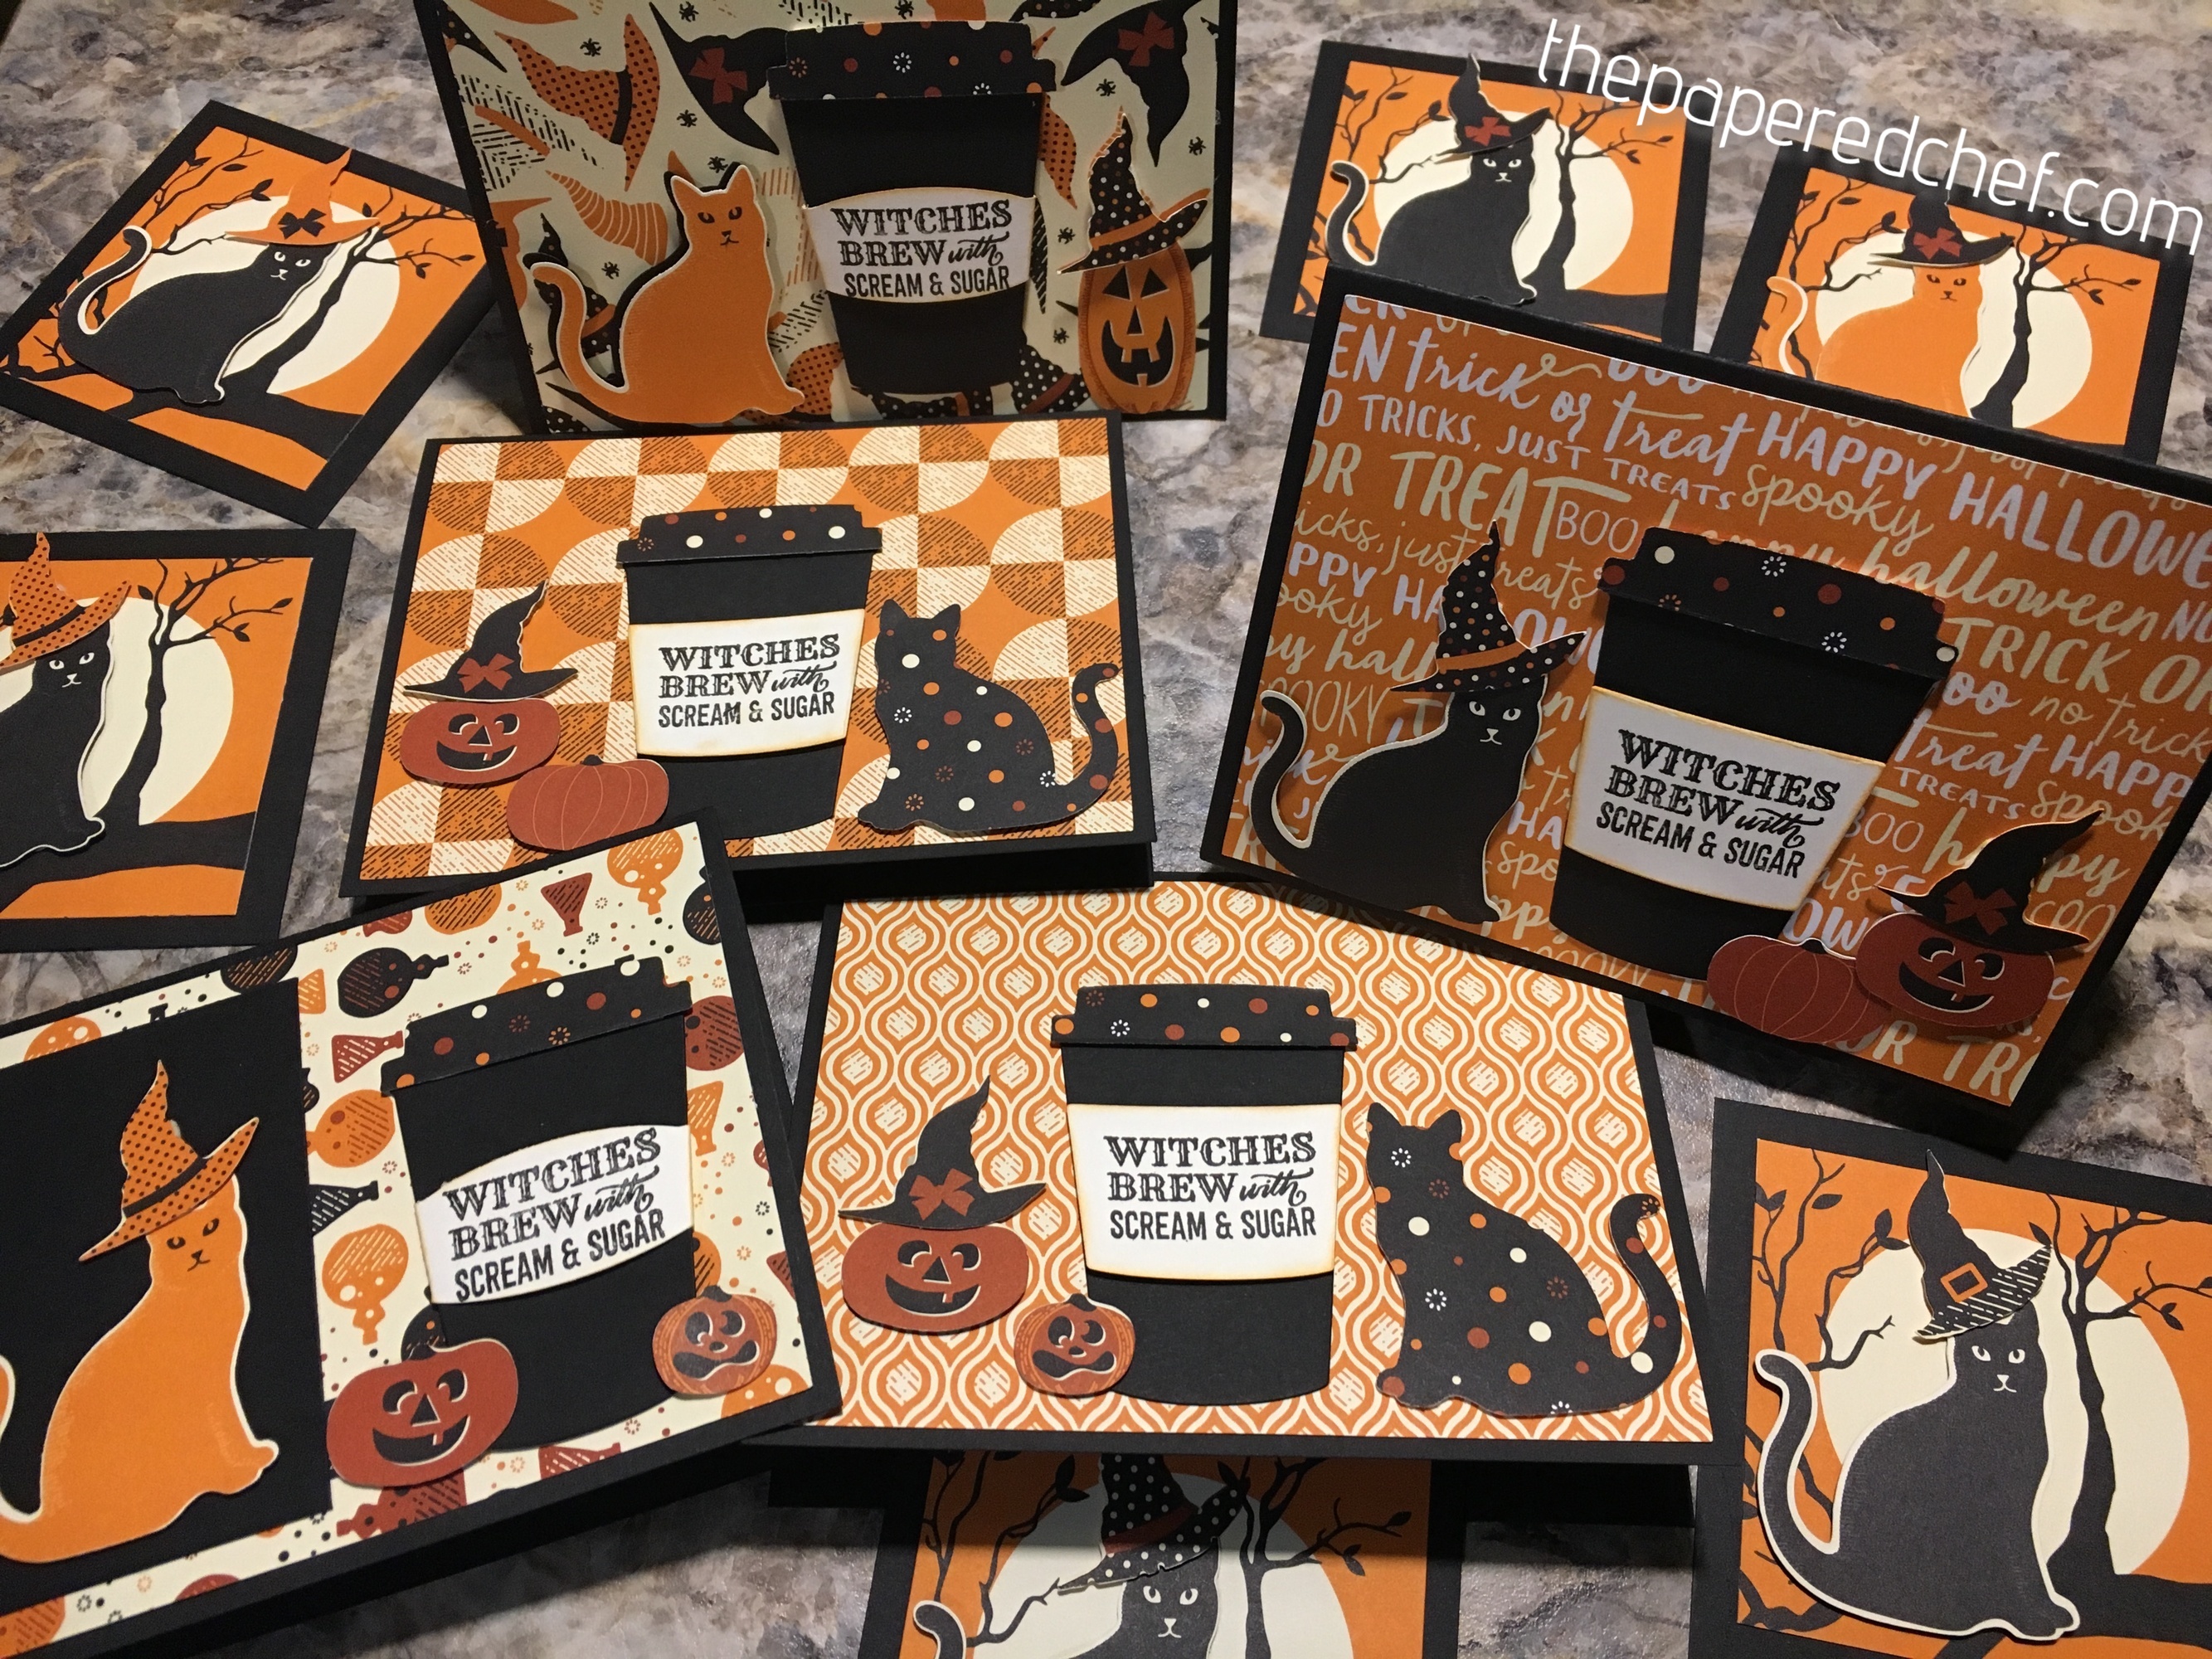 Witches Brew with Scream & Sugar Cards